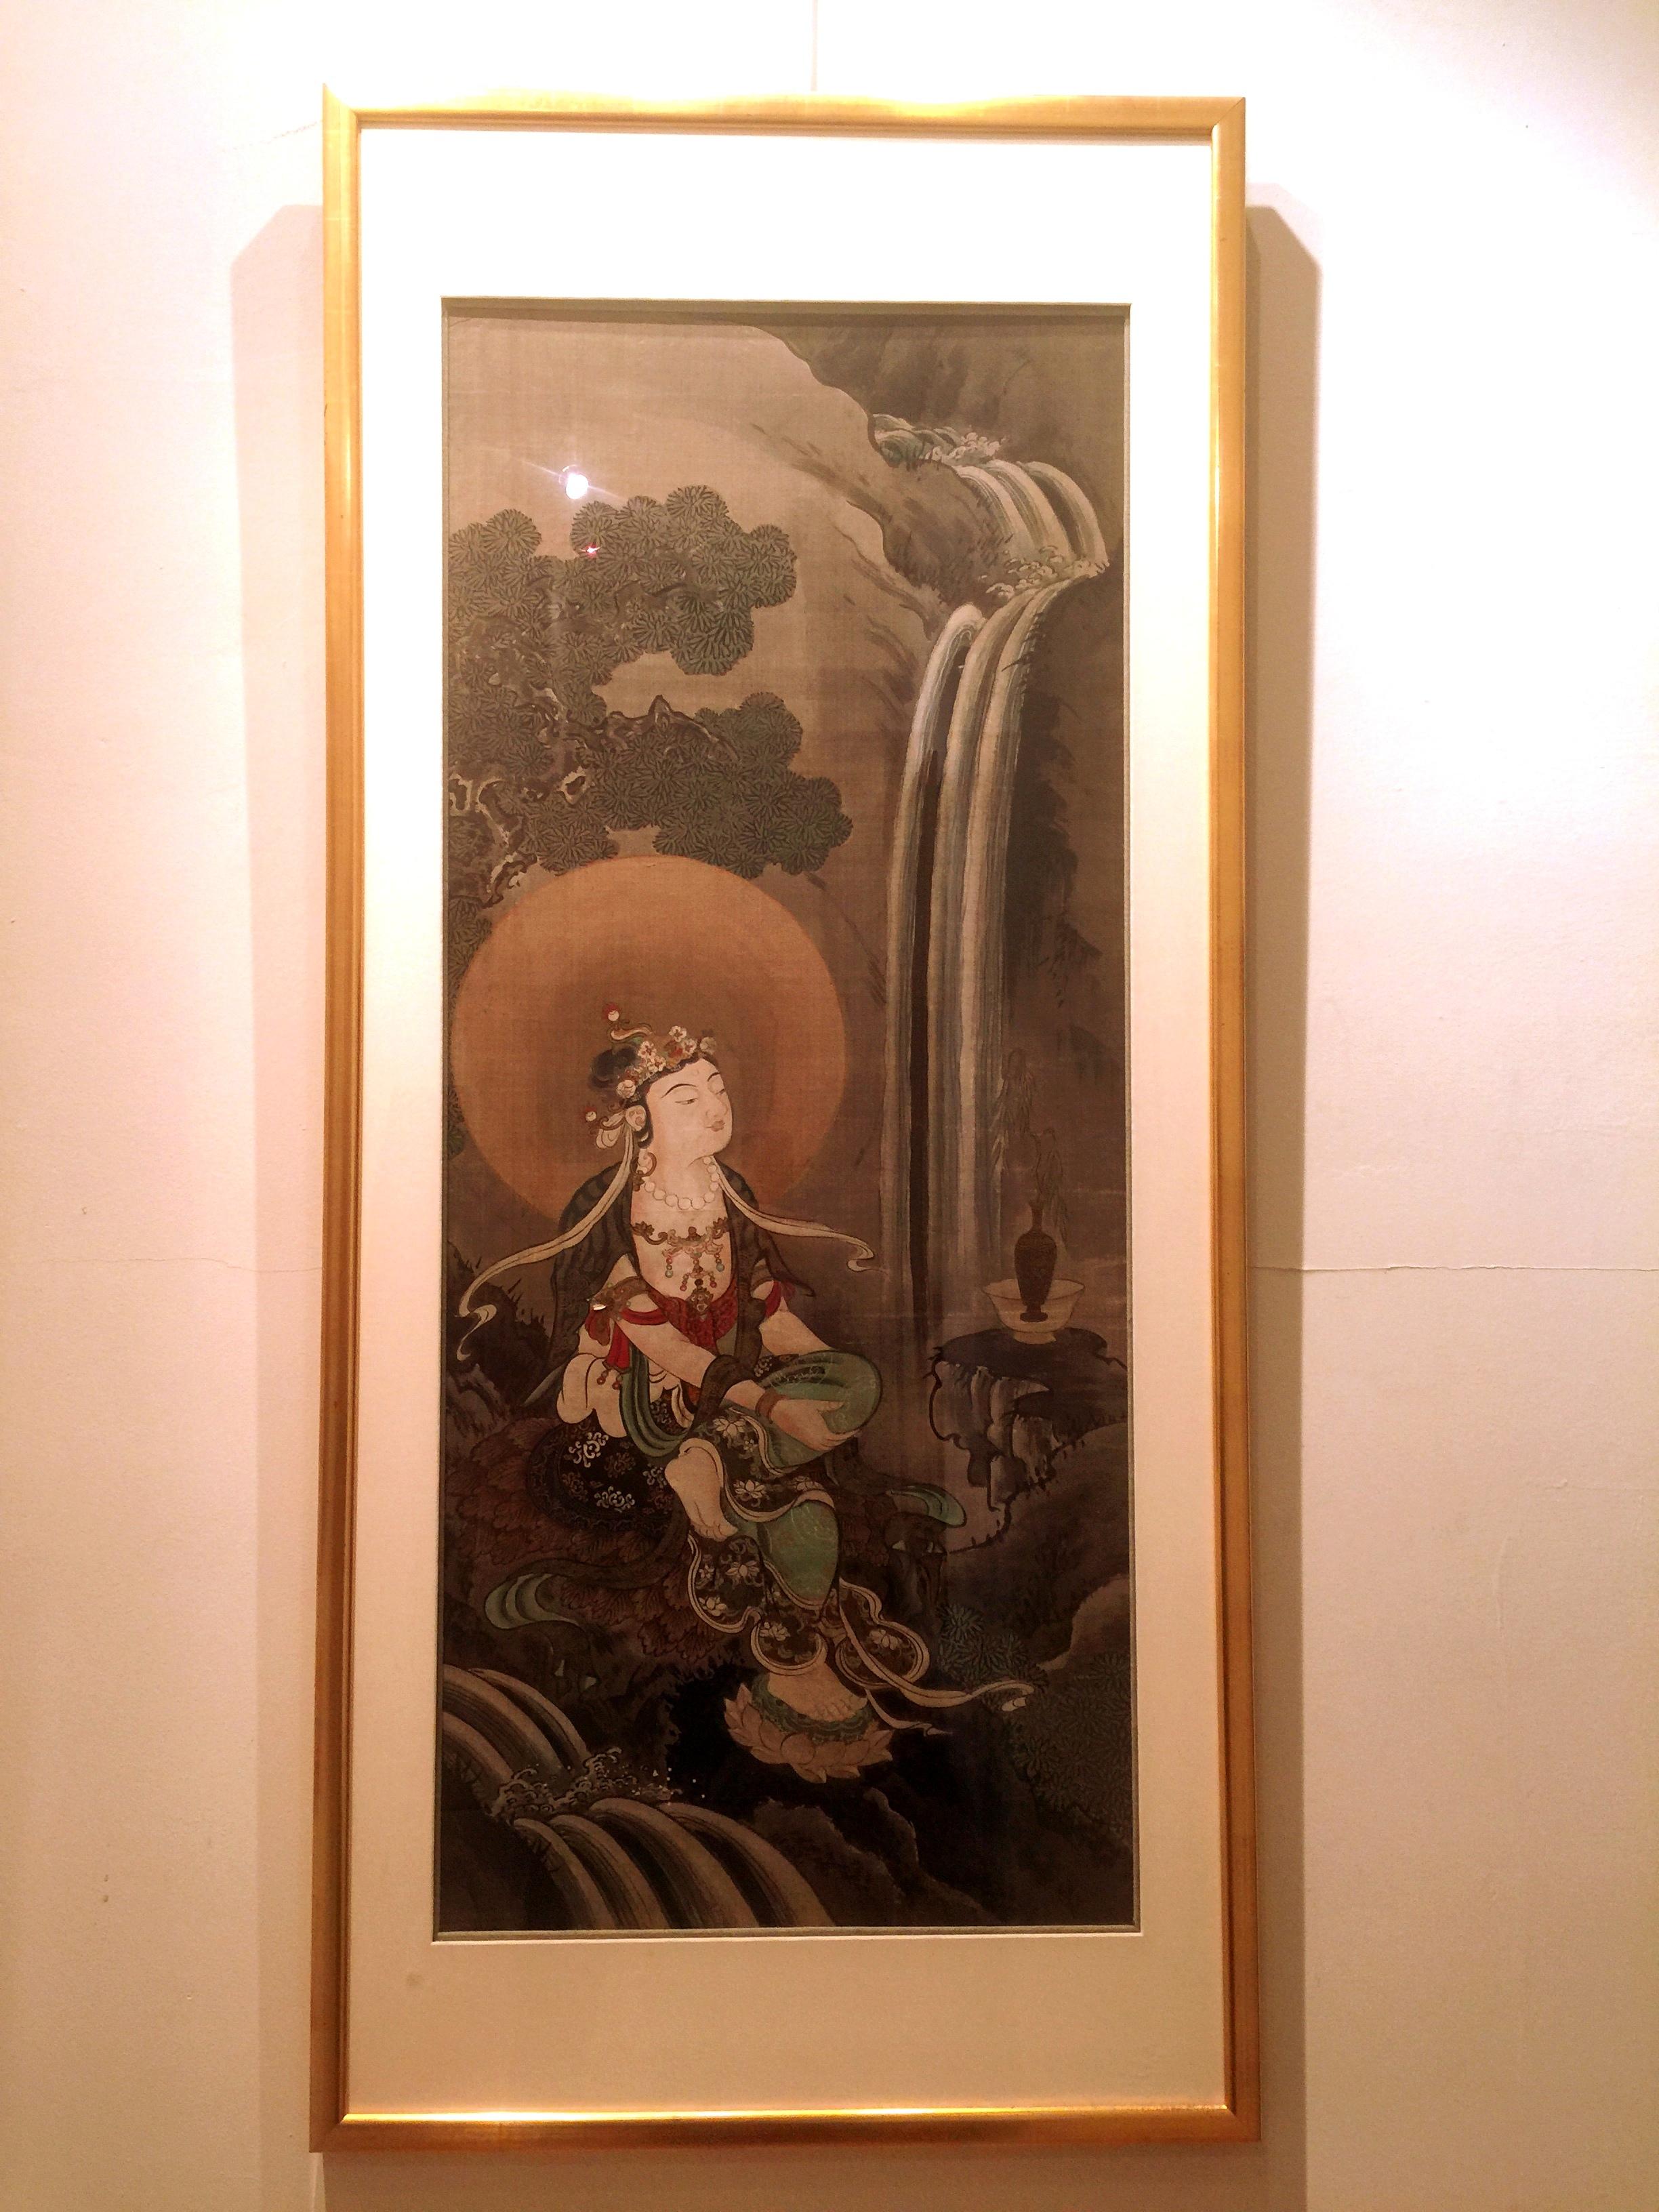 refined Japanese brush painting of Bodhisattva sitting by stream, waterfall and pine tree, ink and color on silk, 19th century, conservation framed.
Overall size:  25 1/2